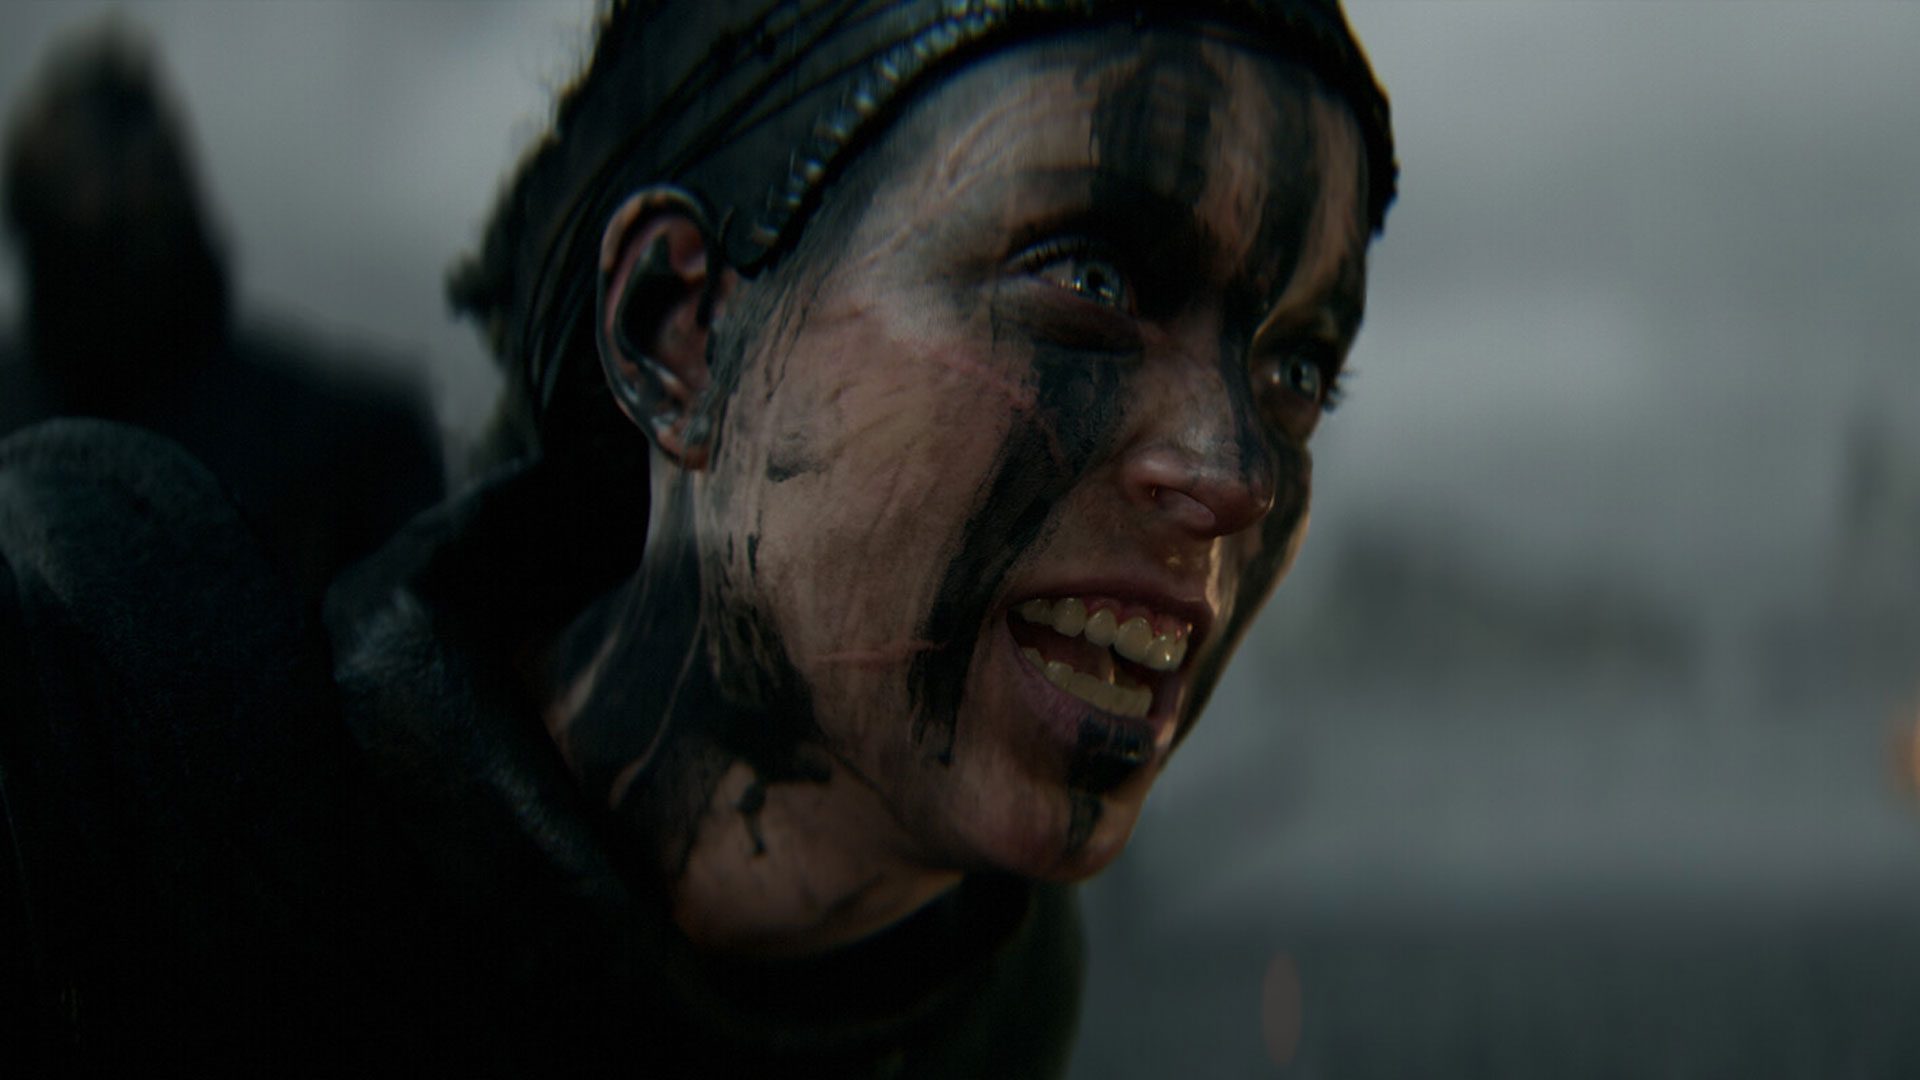 ‘Hellblade: Senua’s Sacrifice’ Studio Has No Plans to Support VR for Upcoming Sequel